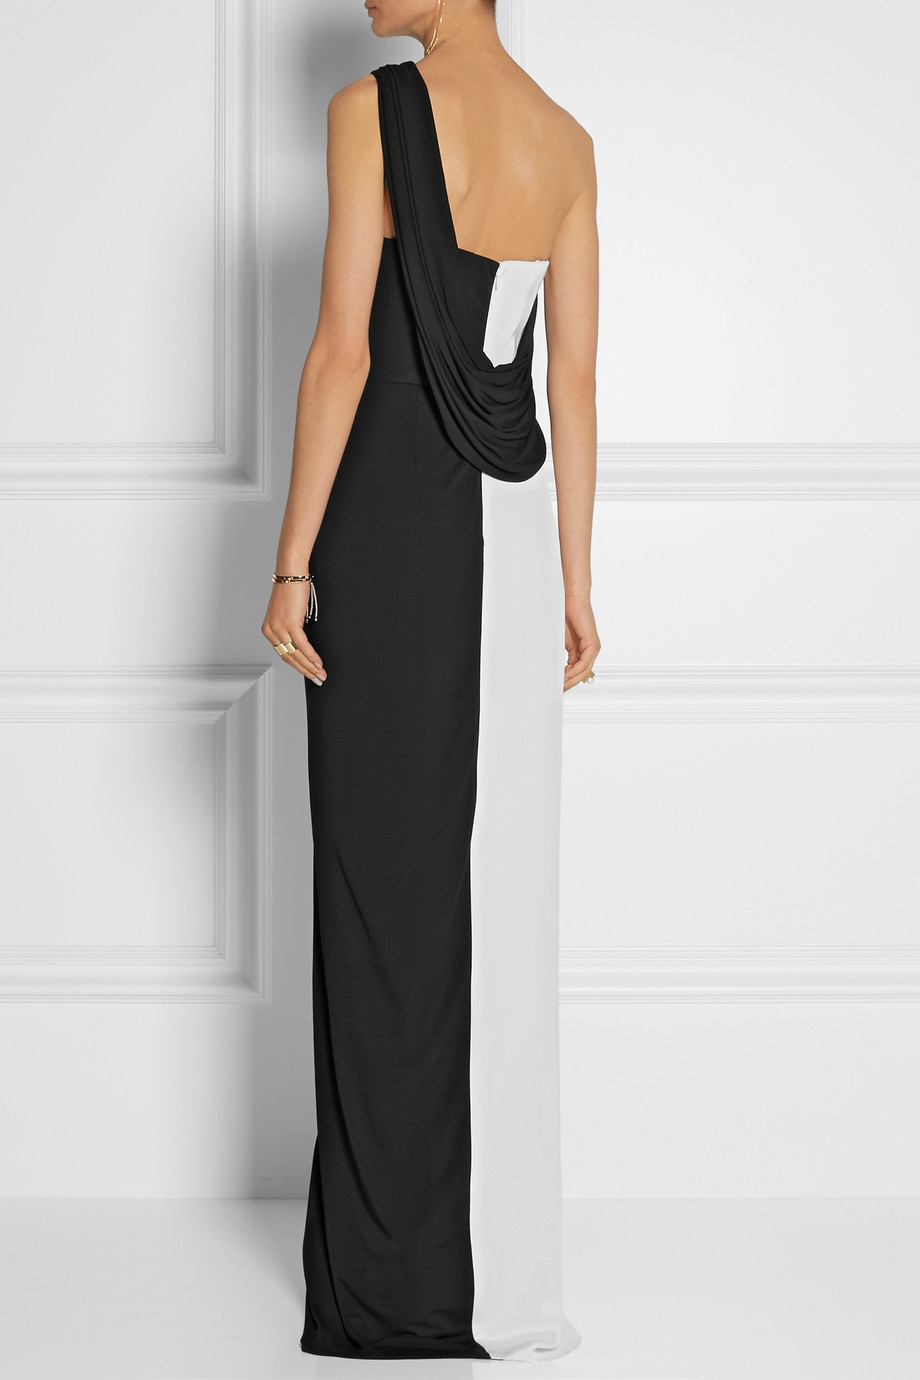 Lyst - Prabal gurung Oneshoulder Draped Satin and Jersey Gown in White